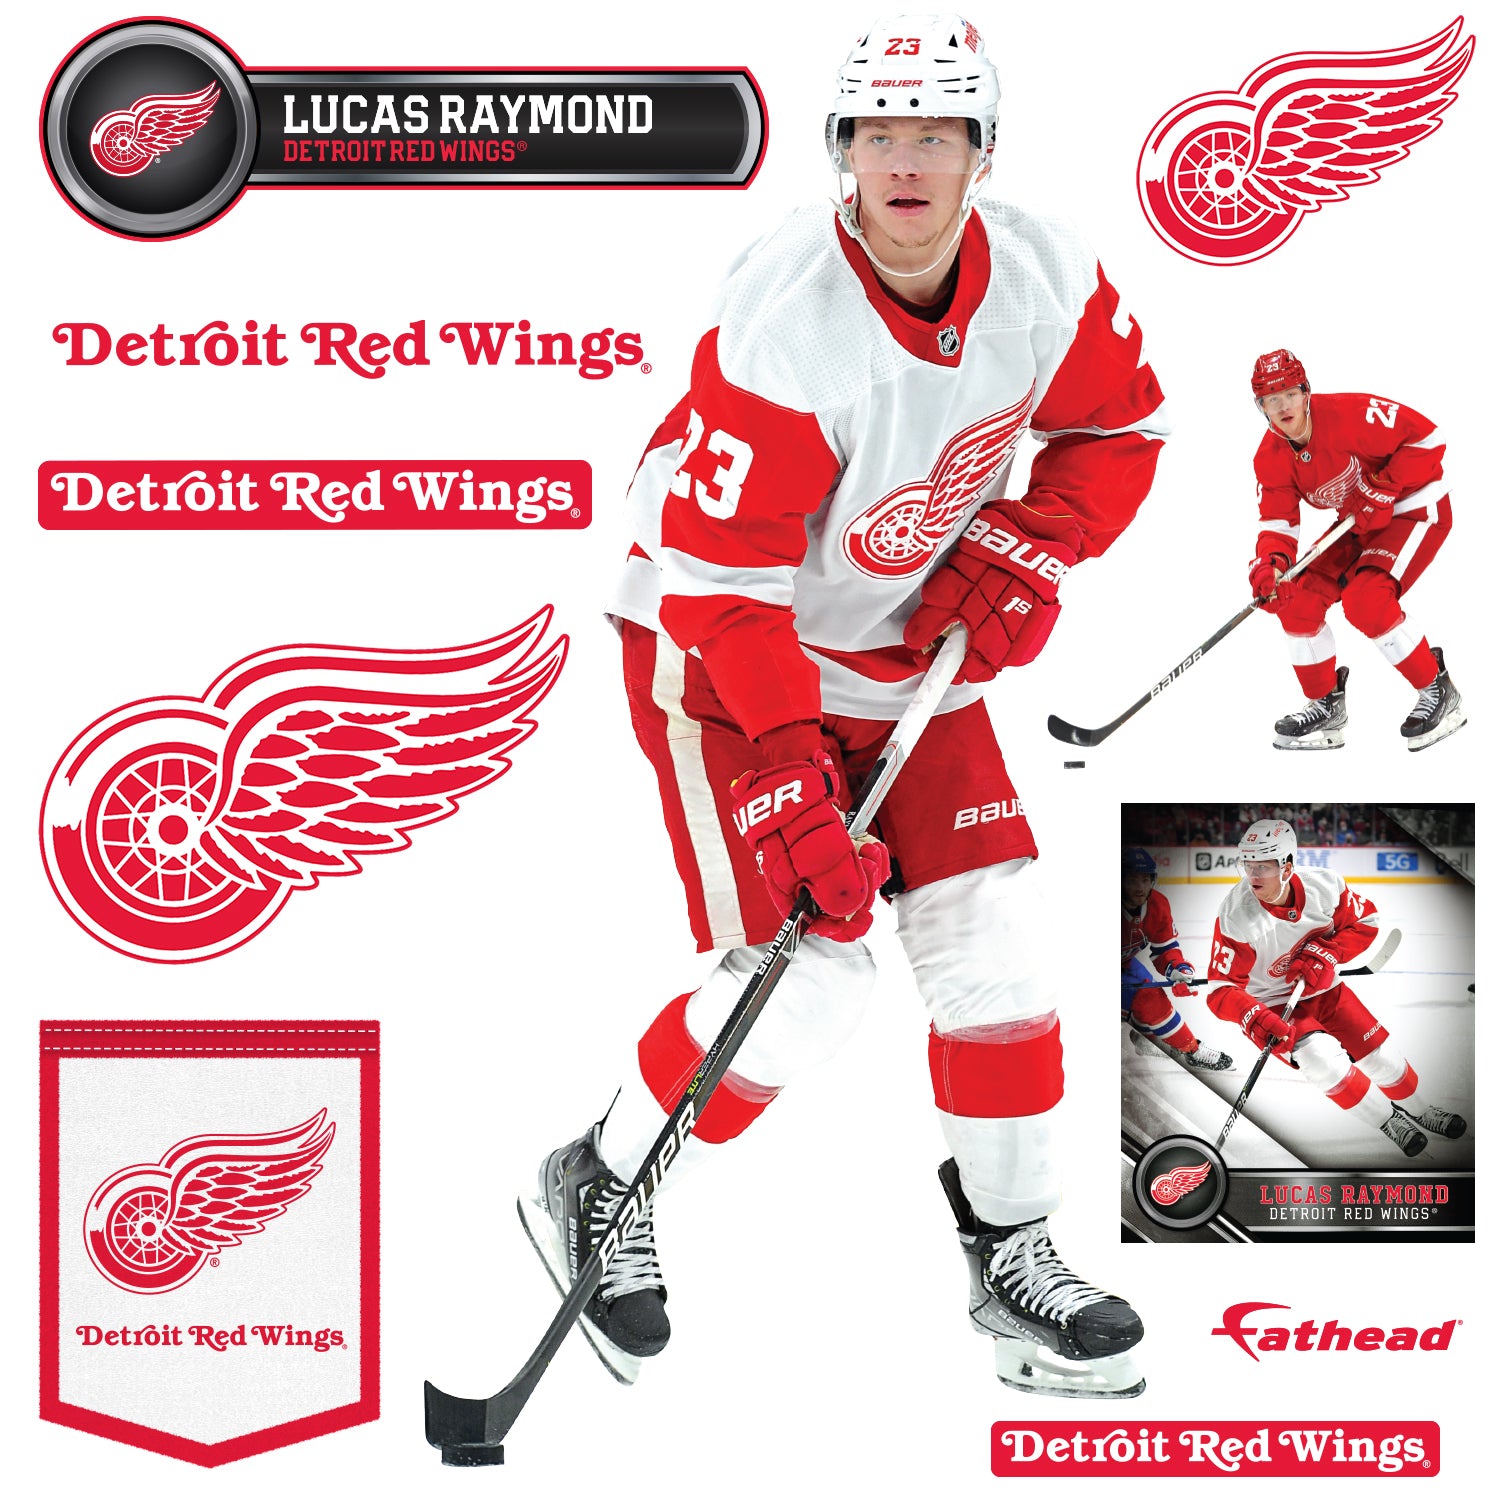 Detroit Red Wings on X: Happy Birthday DMac! 👊